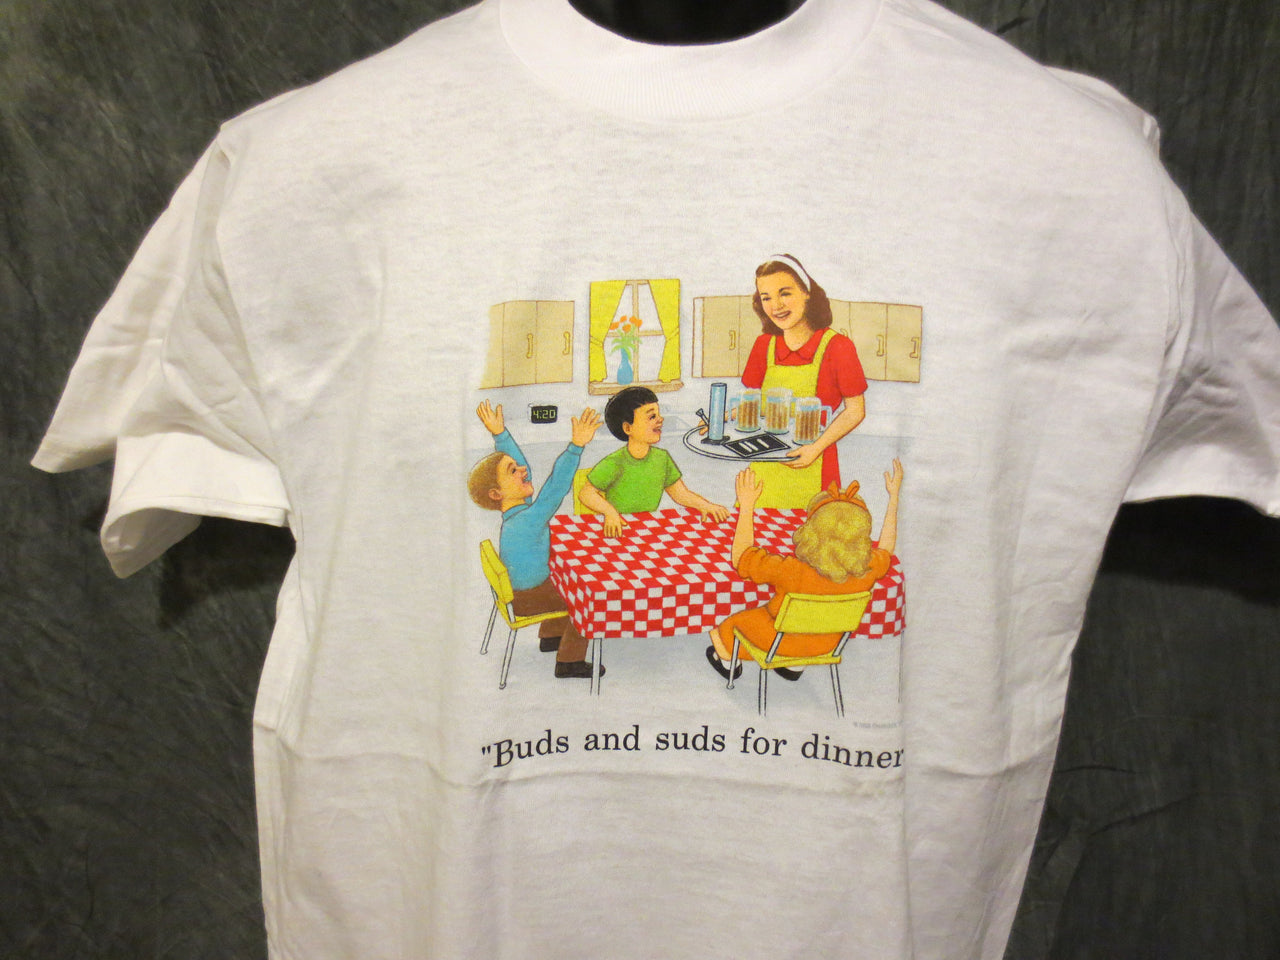 Childhood Buds and Suds for Dinner Adult White Tshirt - TshirtNow.net - 4